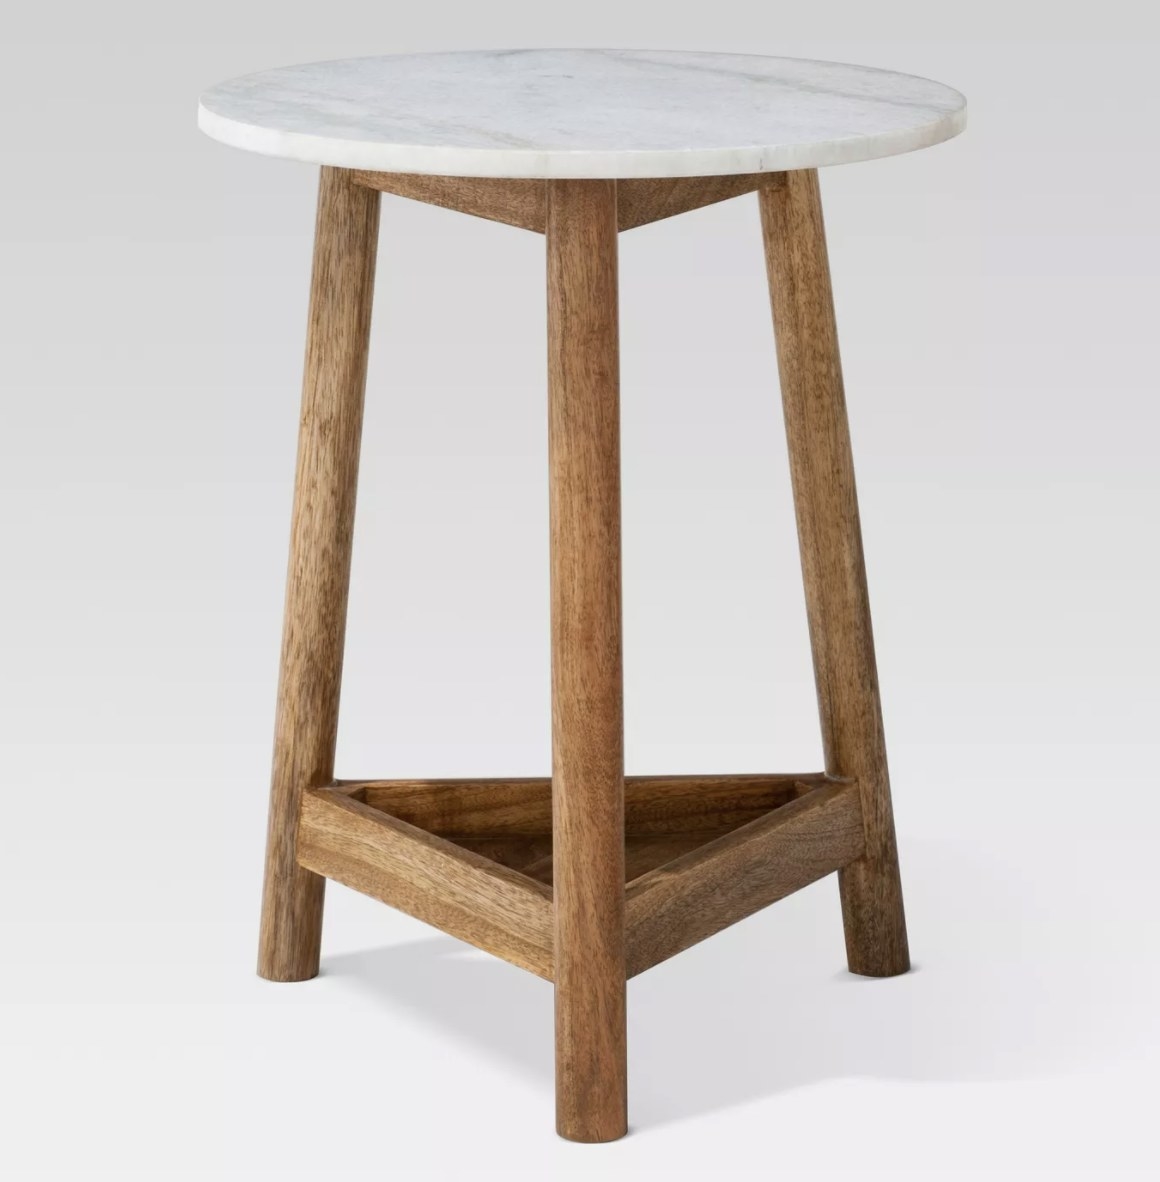 The table has three light brown wooden legs, a triangular shelf base and a circular top of white marble